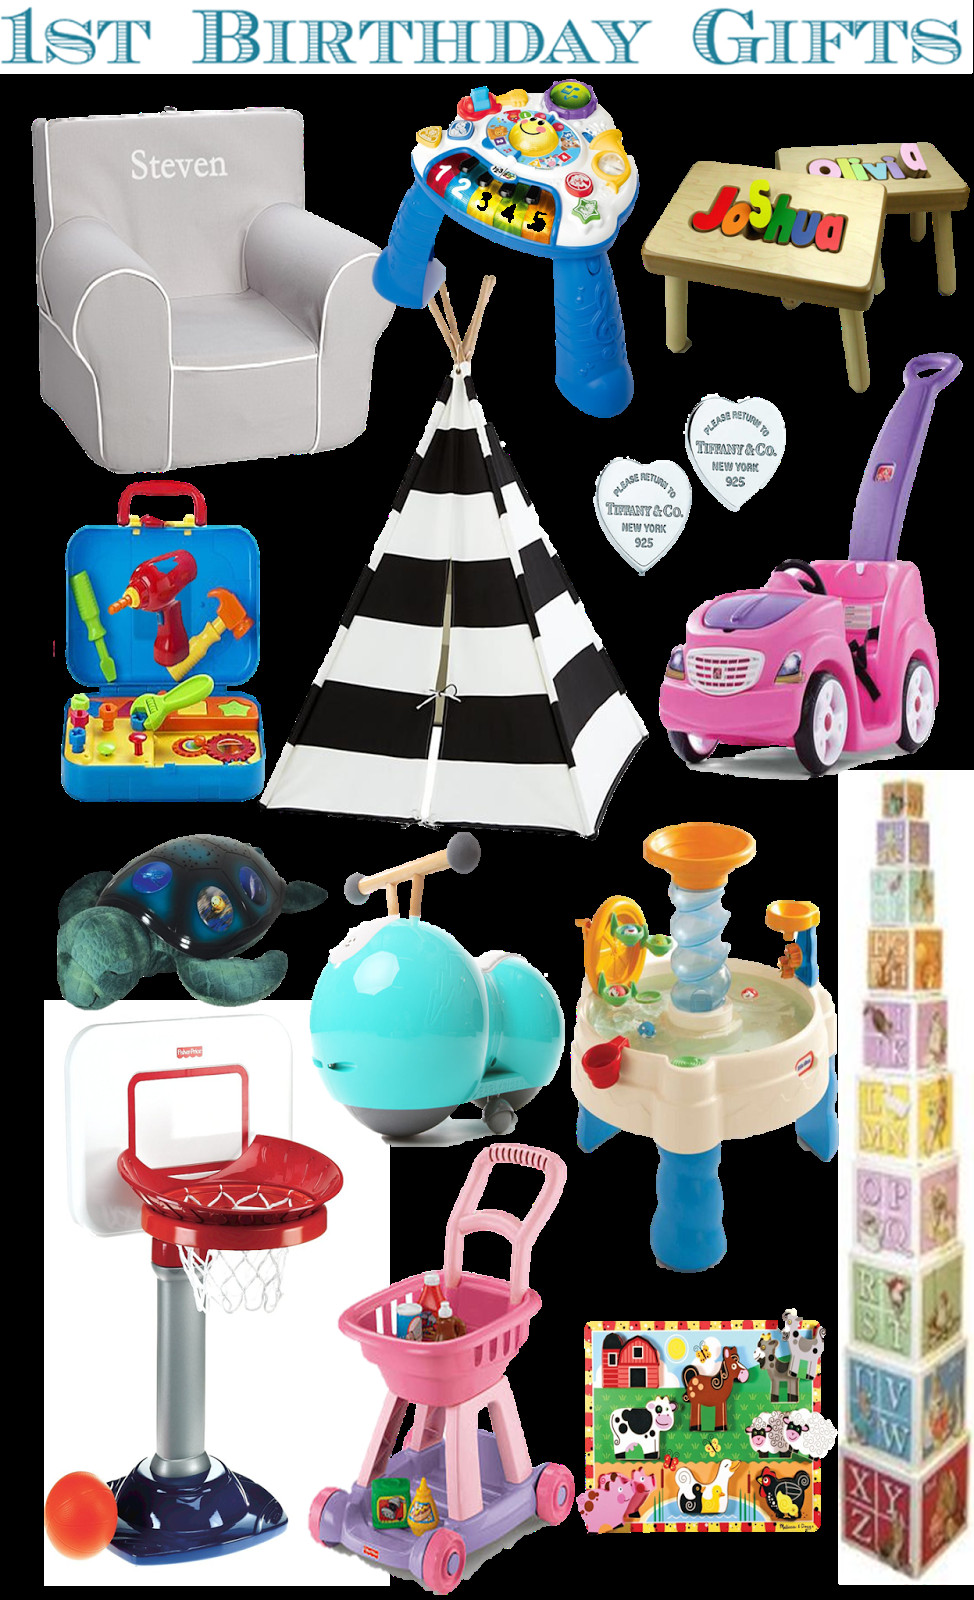 1st Birthday Gifts For Boy
 rnlMusings Gift Guide 1st Birthday Gifts